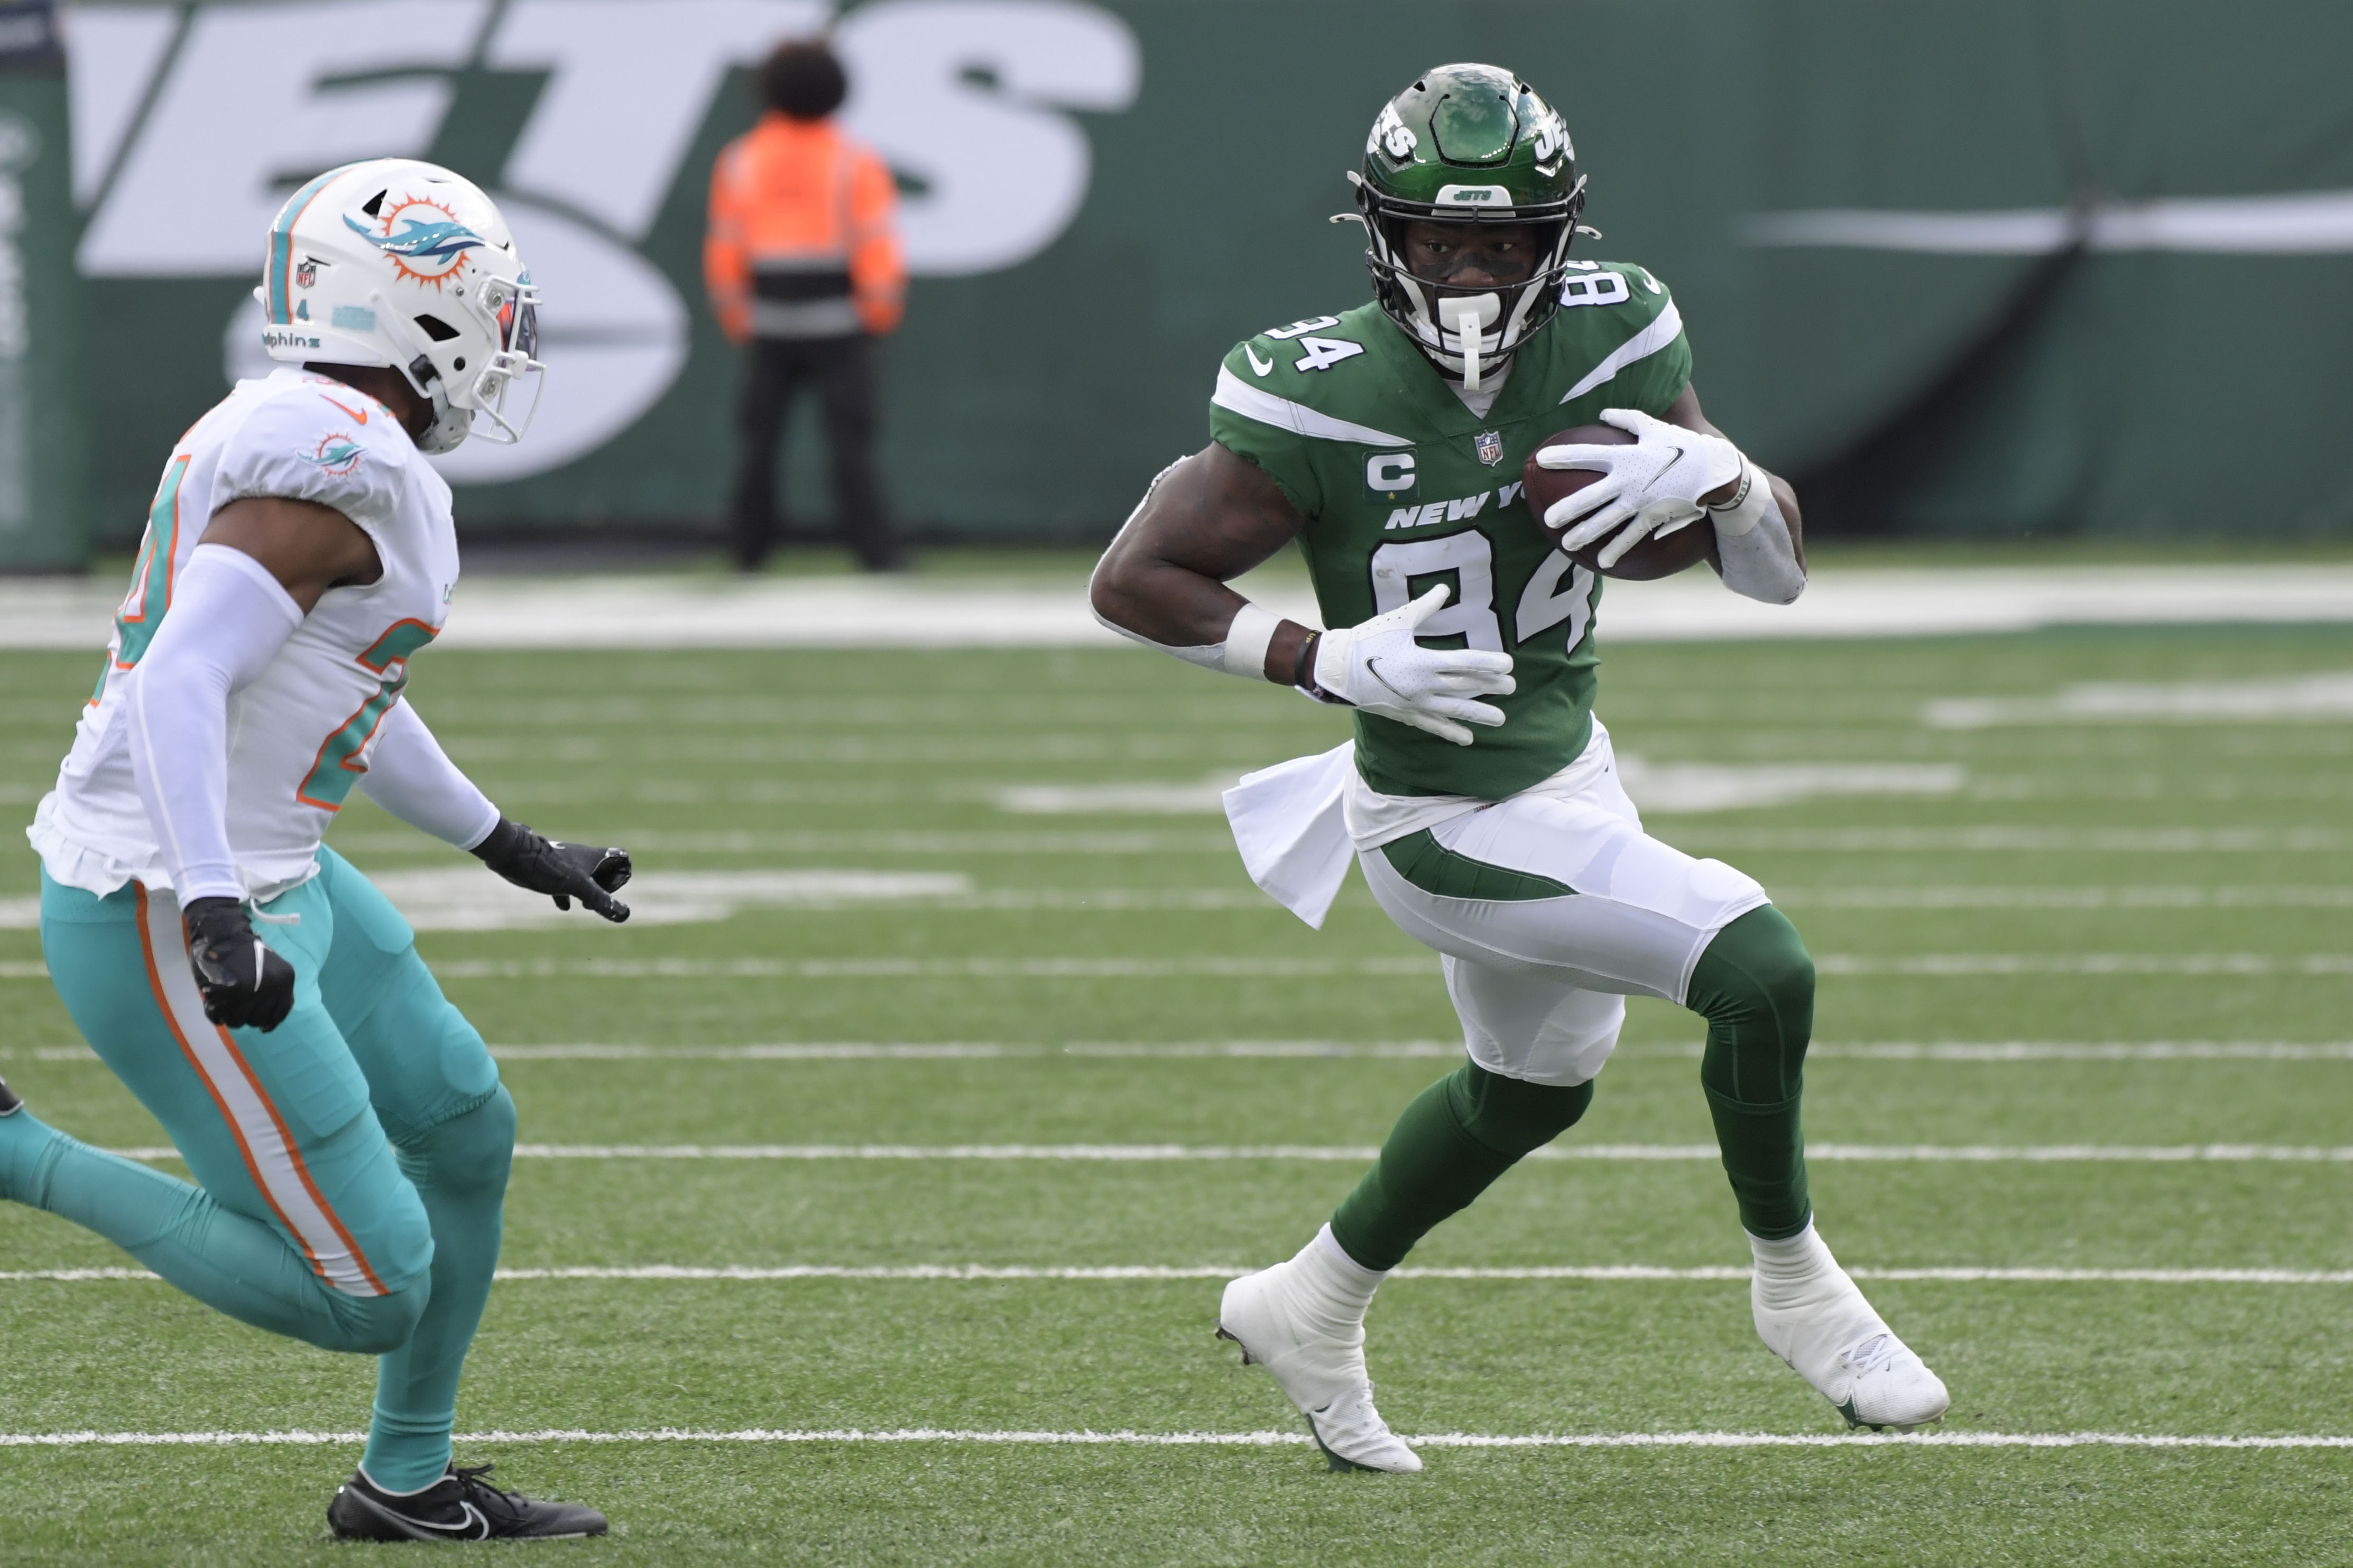 Corey Davis of Jets says he is stepping away from football